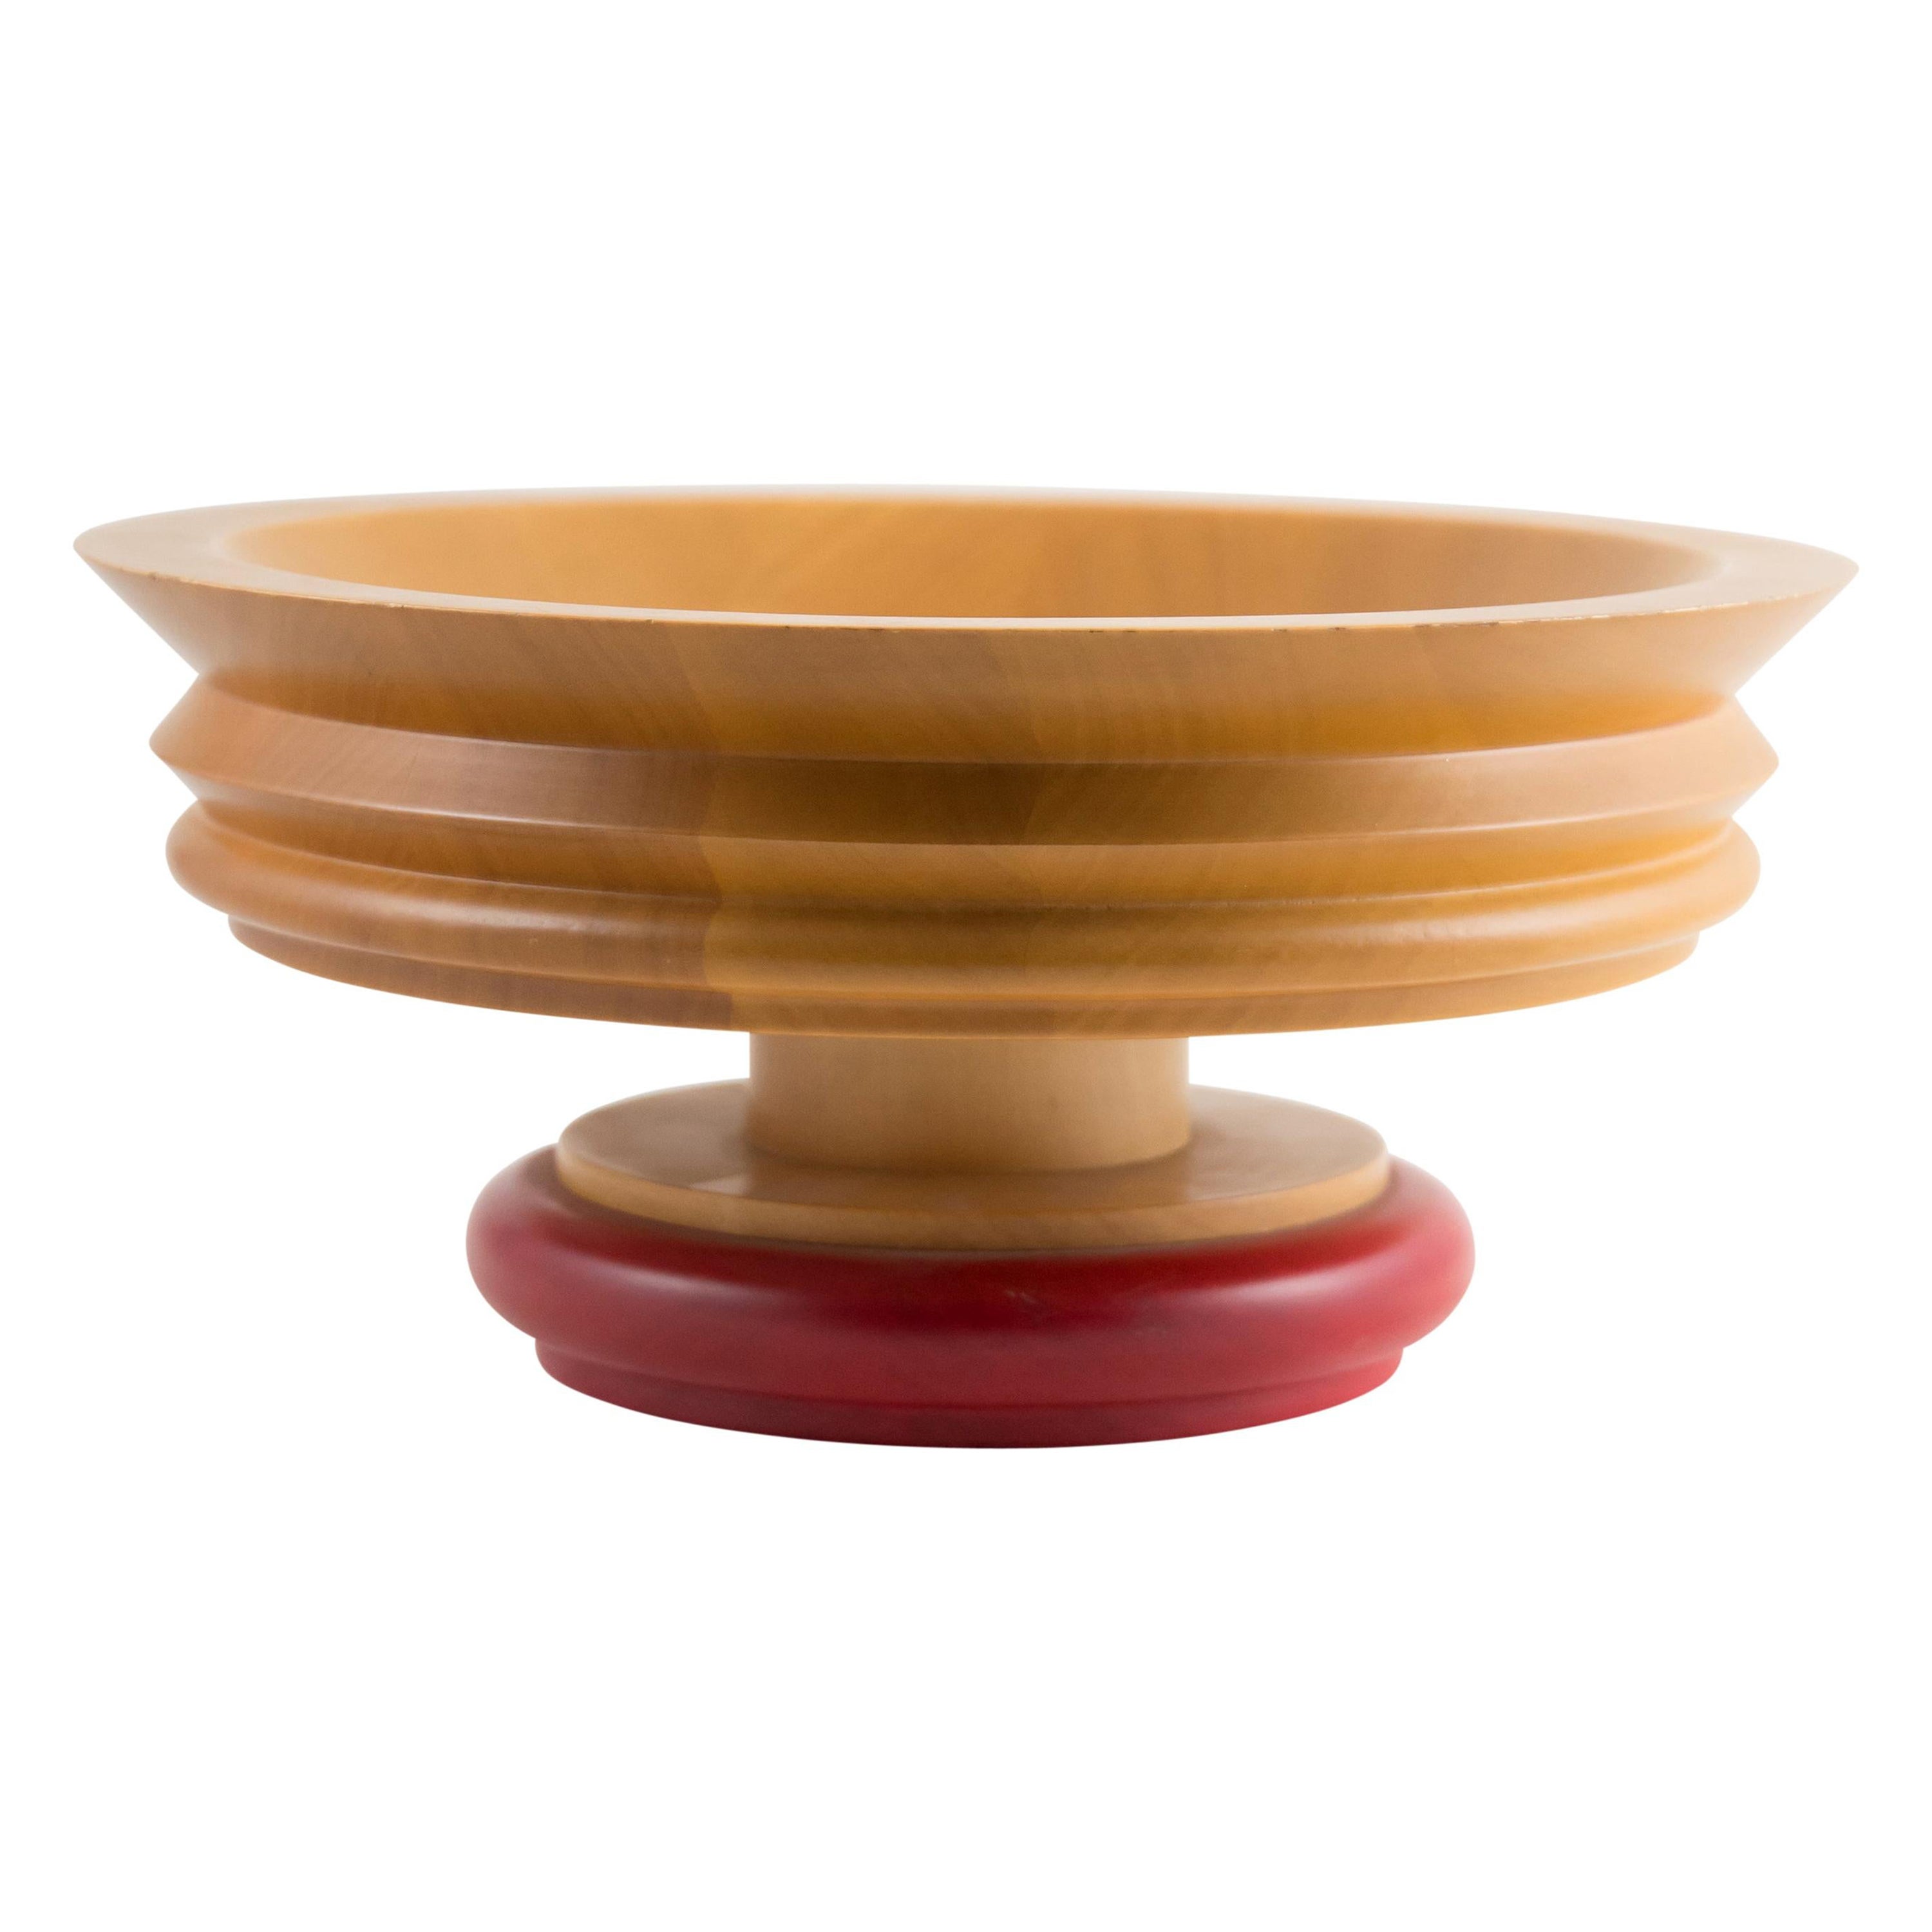 1990s Italian Design Red Rim Wooden Bowl by Ettore Sottsass for Twergi For Sale